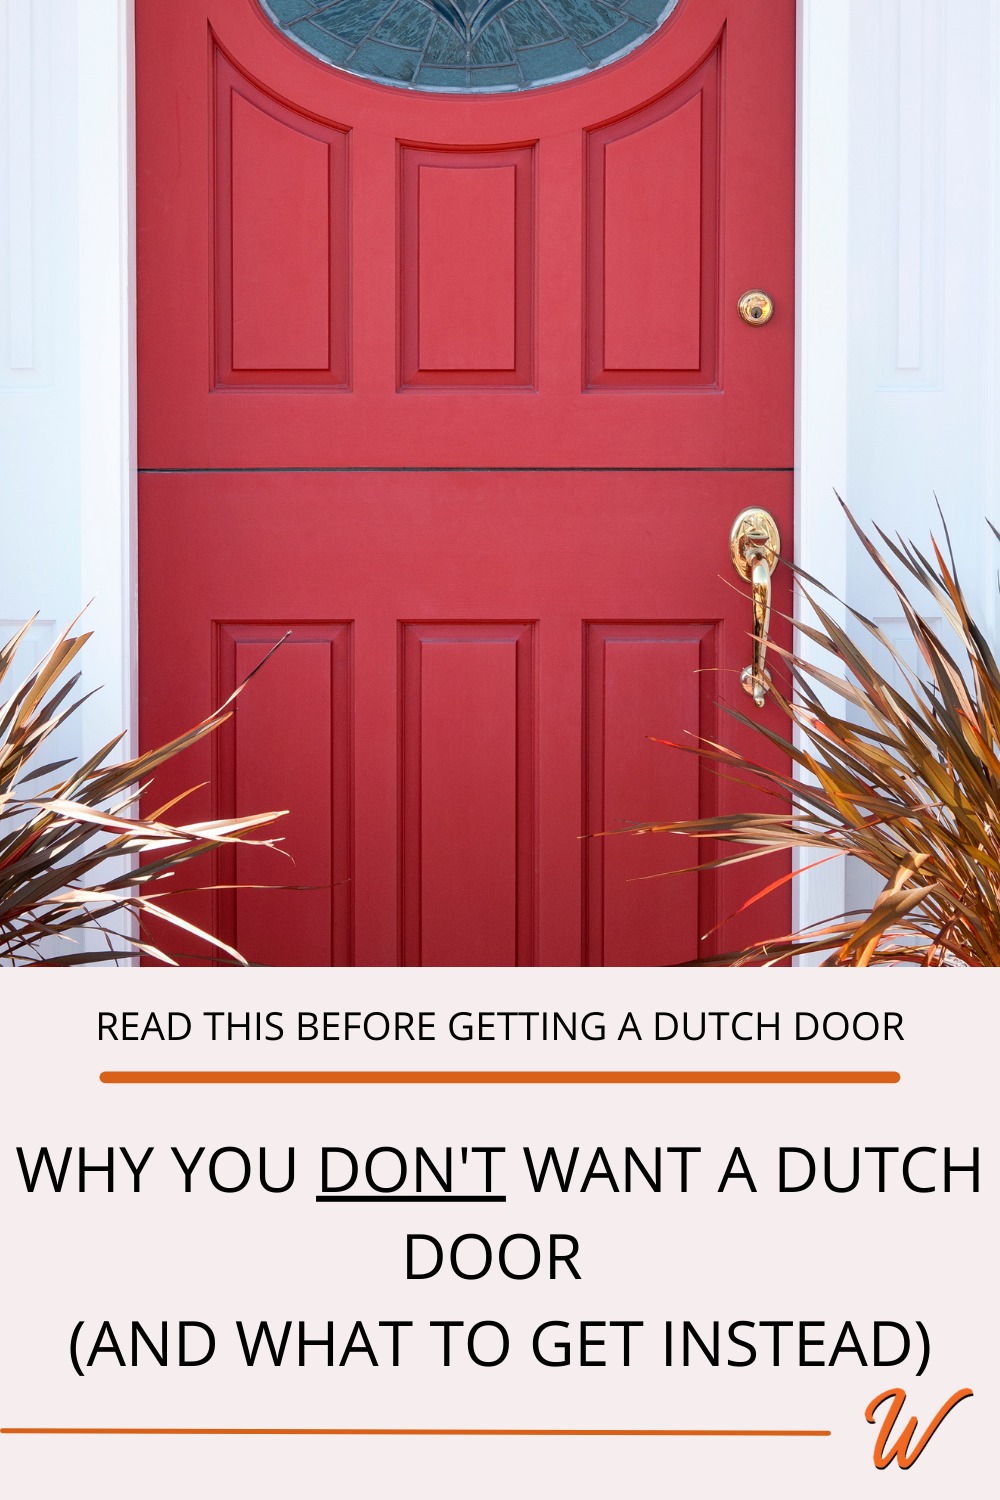 Close up of a red Dutch door captioned with "Why you don't want a Dutch Door (and what to get instead)